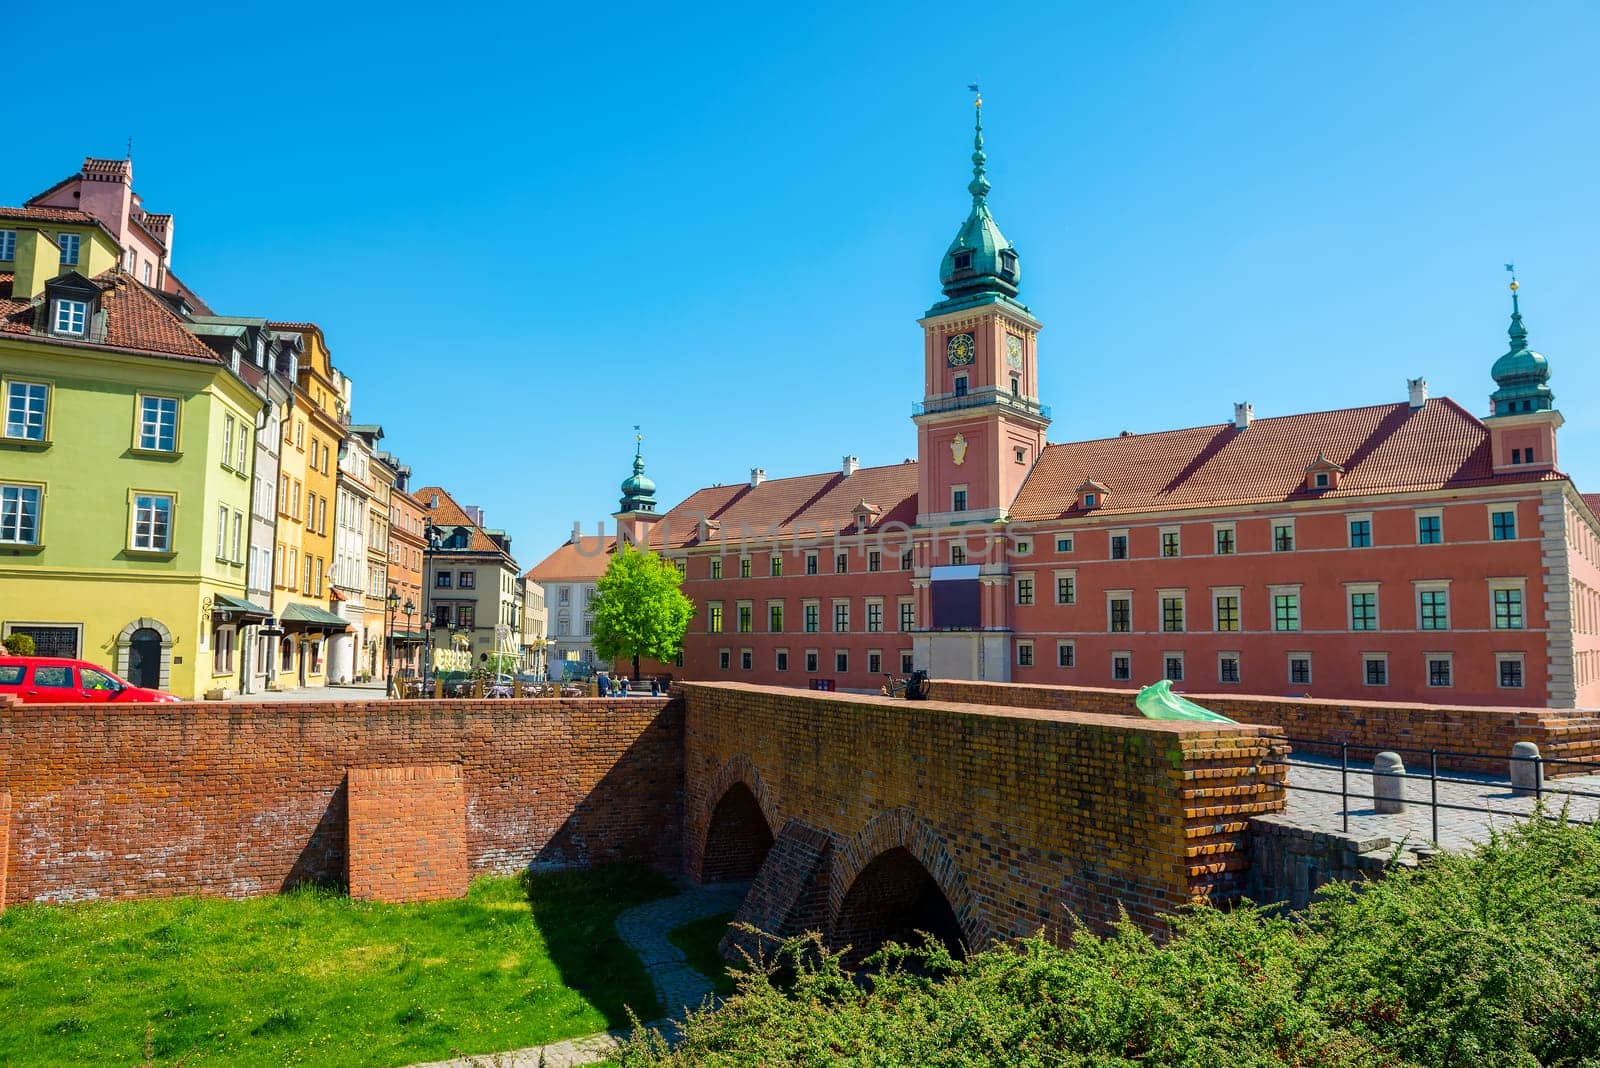 The Royal Castle of Warsaw is a castle residency that formerly served throughout the centuries as the official residence of the Polish monarchs.